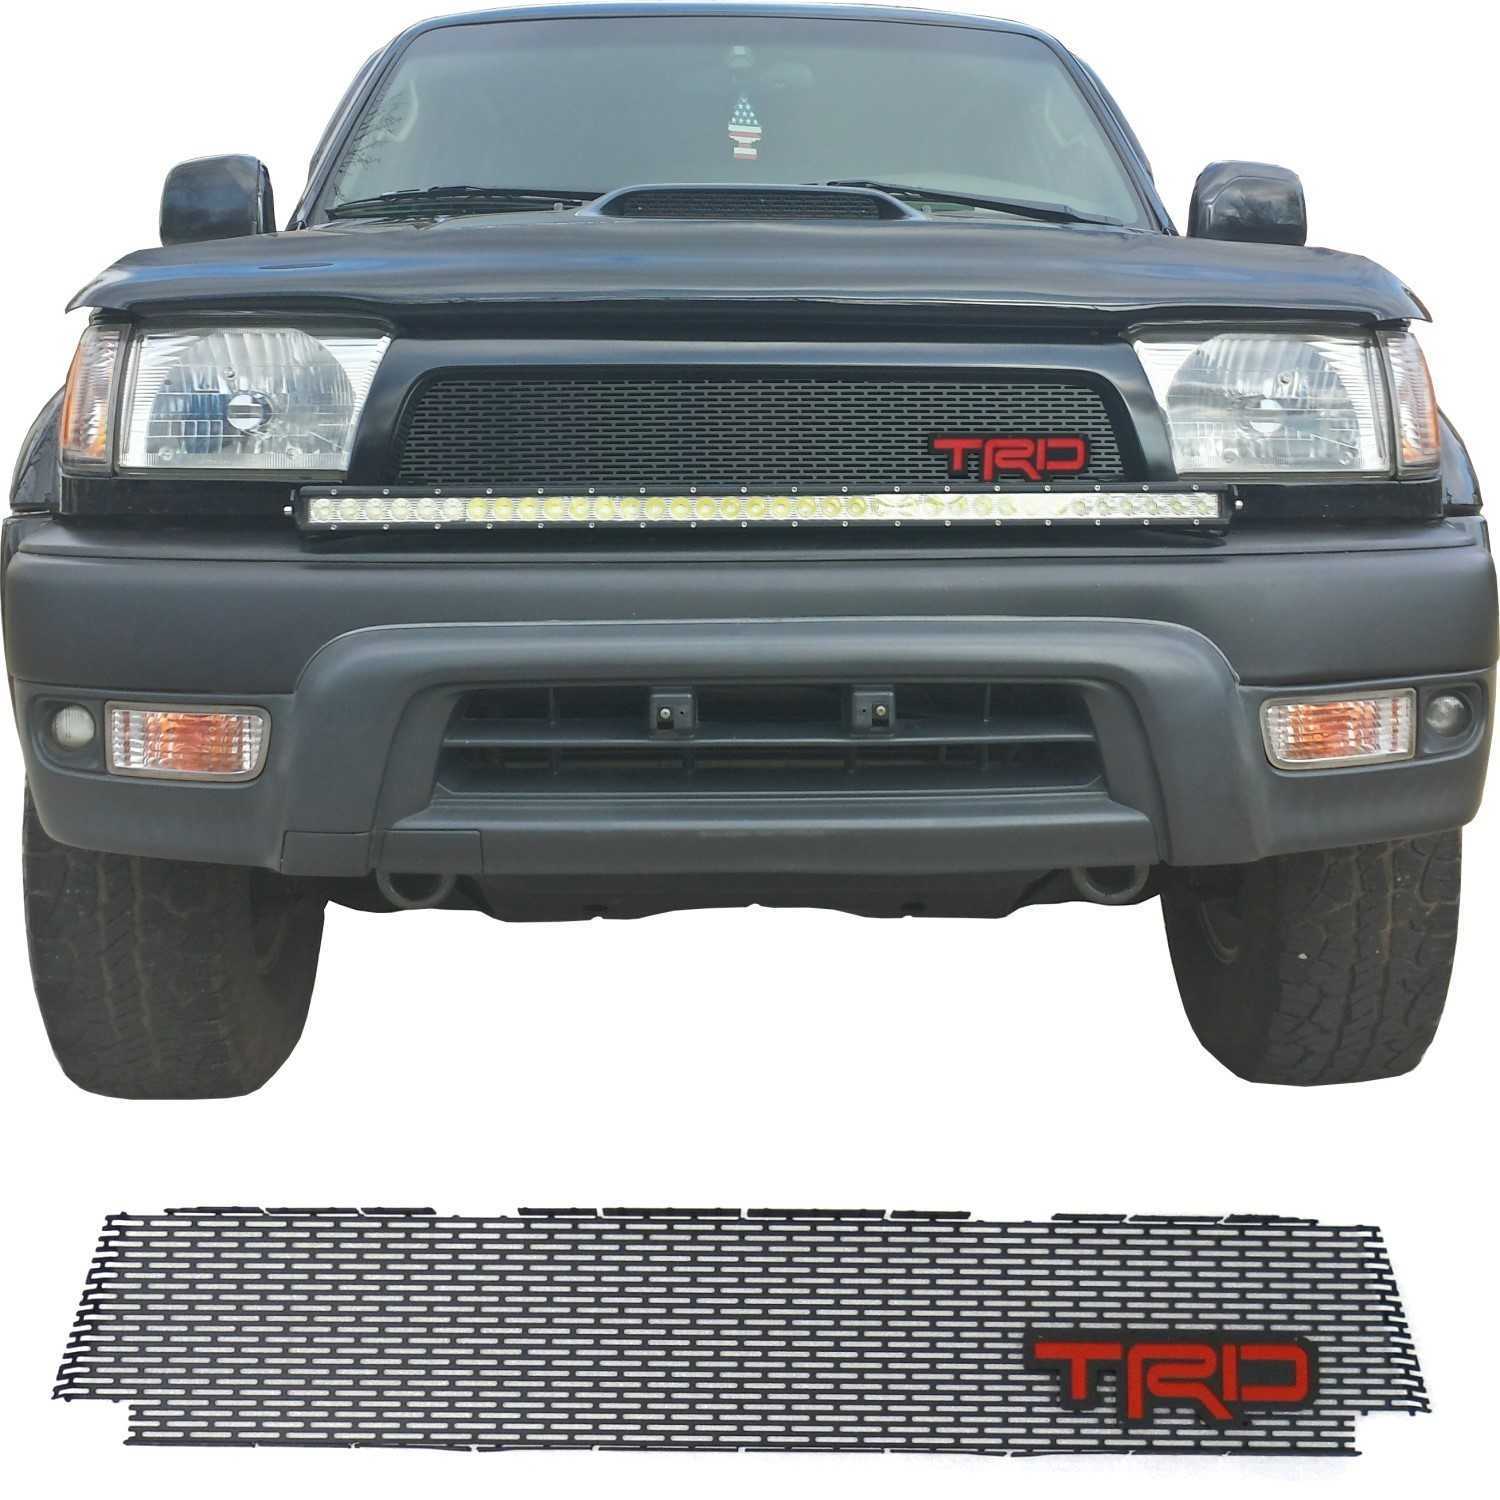 1996-98 (and 99-02*) Toyota 4Runner Grill Mesh With TRD Emblem